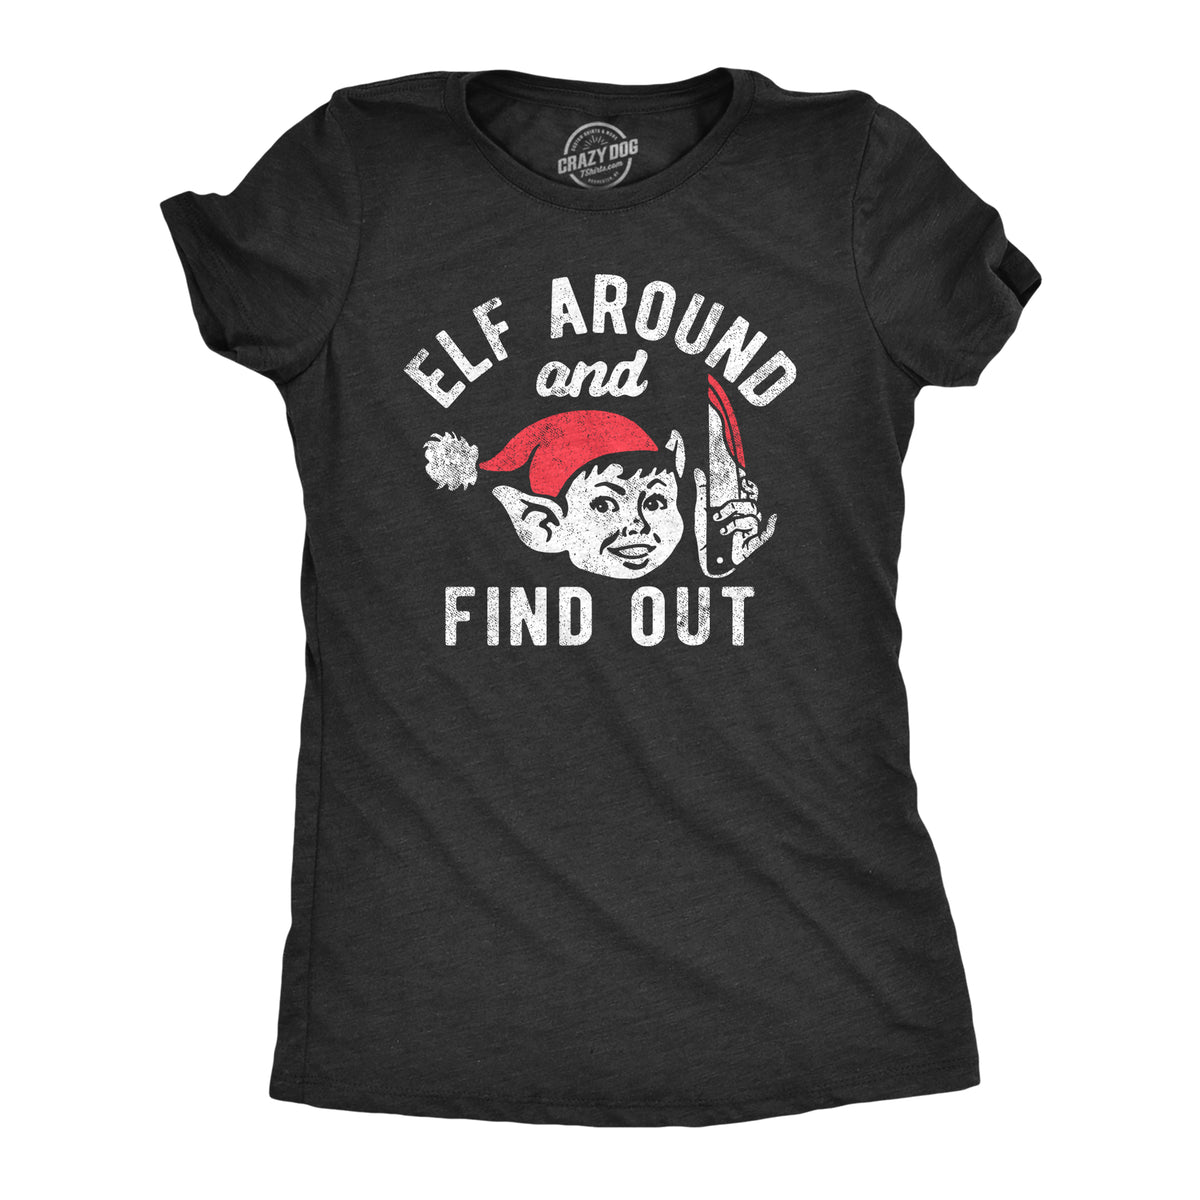 Funny Heather Black - ELF Elf Around And Find Out Womens T Shirt Nerdy Christmas sarcastic Tee